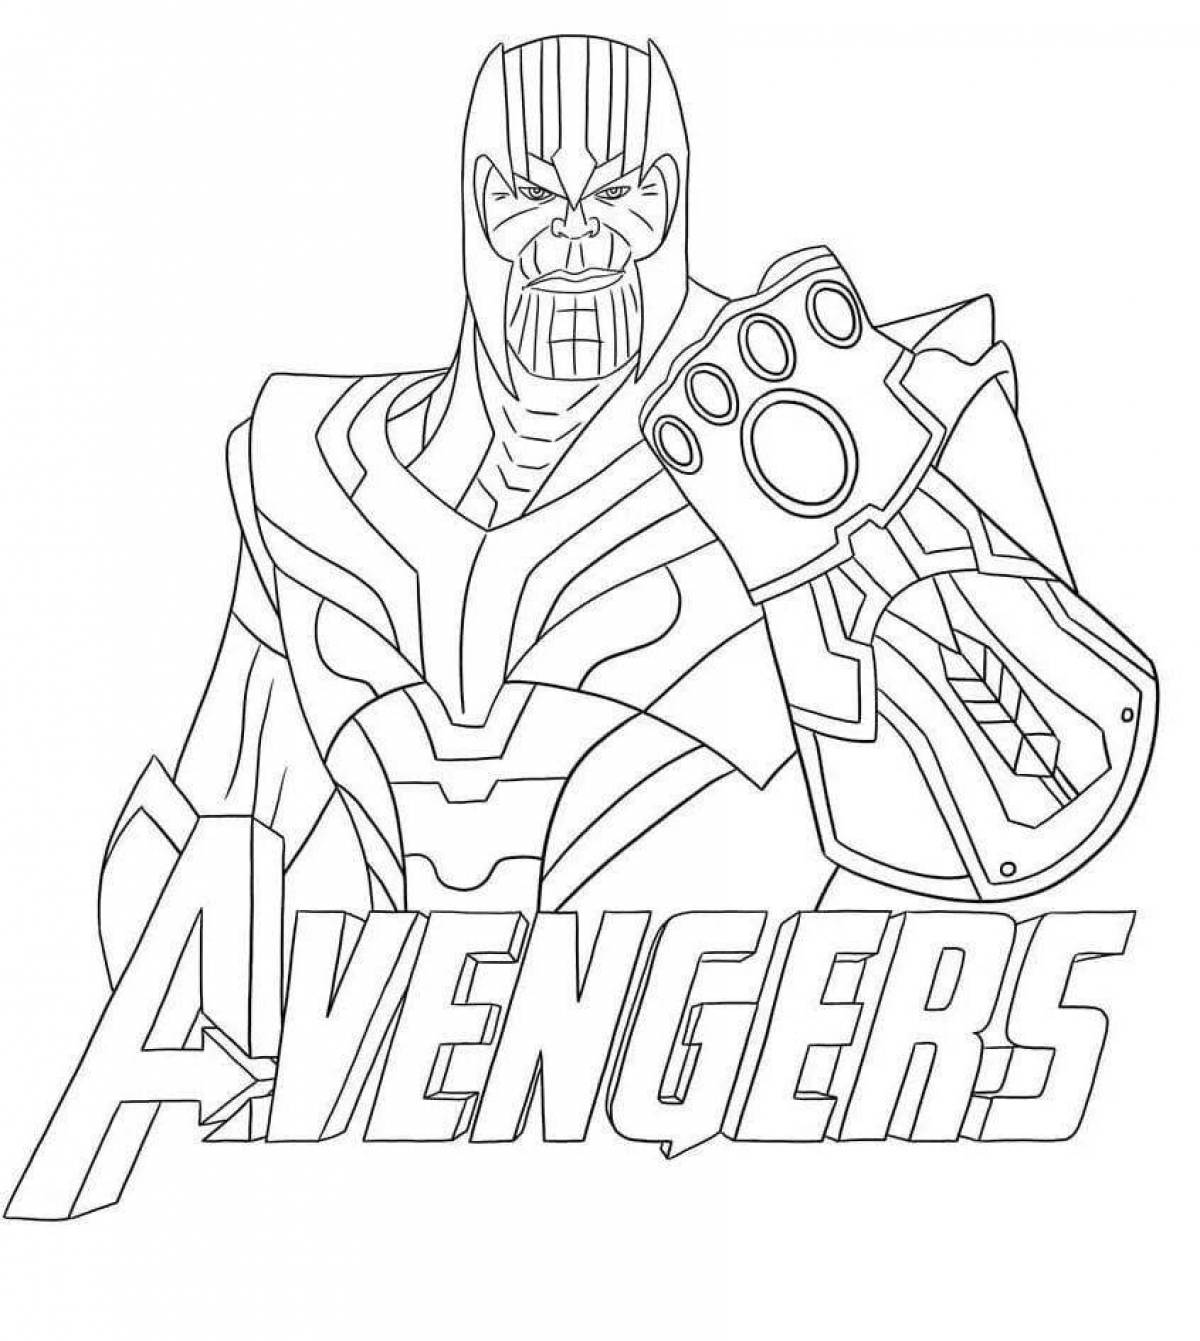 Thanos bright coloring page